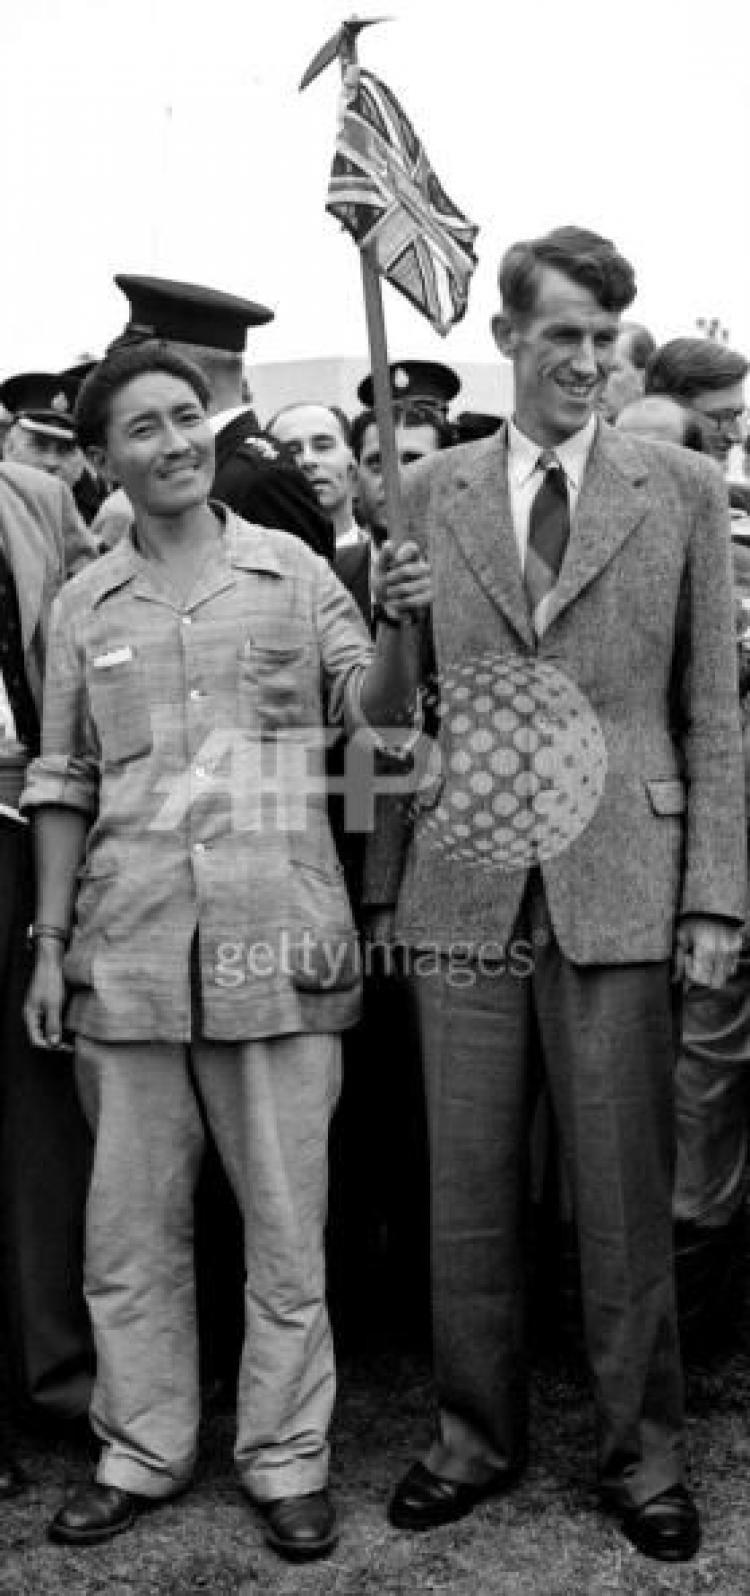 <a><img src="https://www.theepochtimes.com/assets/uploads/2015/09/SirEd_1989338.jpg" alt="Picture dated 03 July 1953 of Mount Everest conquerors Edmund Hillary (R) and Sherpa Tenzing Norgay (L) at London's Heathrow airport on their return from the successful expedition. (AFP/Getty Images)" title="Picture dated 03 July 1953 of Mount Everest conquerors Edmund Hillary (R) and Sherpa Tenzing Norgay (L) at London's Heathrow airport on their return from the successful expedition. (AFP/Getty Images)" width="320" class="size-medium wp-image-1816510"/></a>